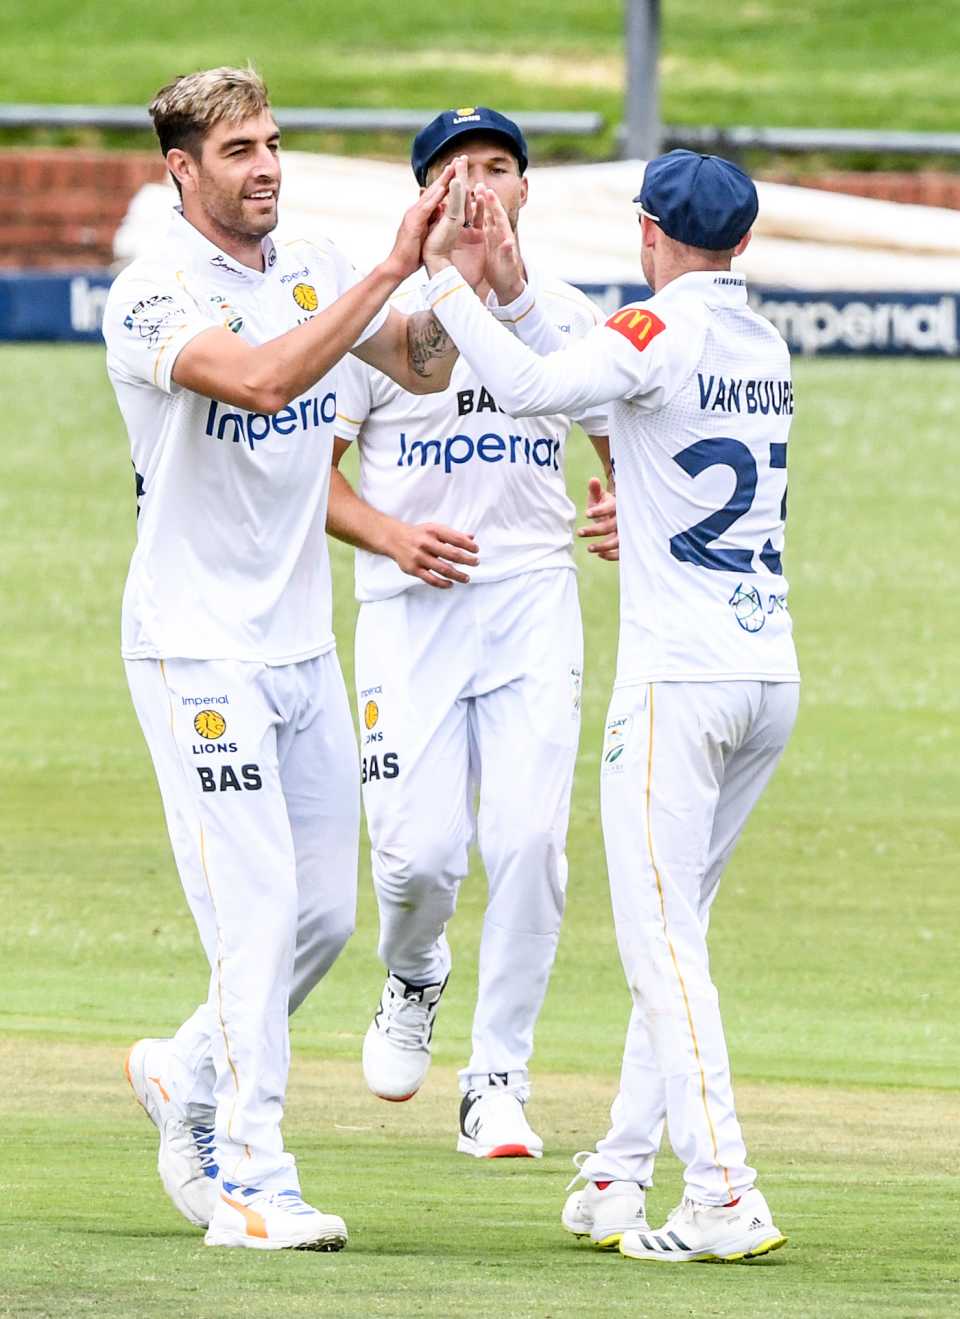 Duanne Olivier gets some high-fives from his team-mates, Knights vs Lions, 4-Day Franchise Series, Division 1, Johannesburg, 3rd day, November 27, 2021
